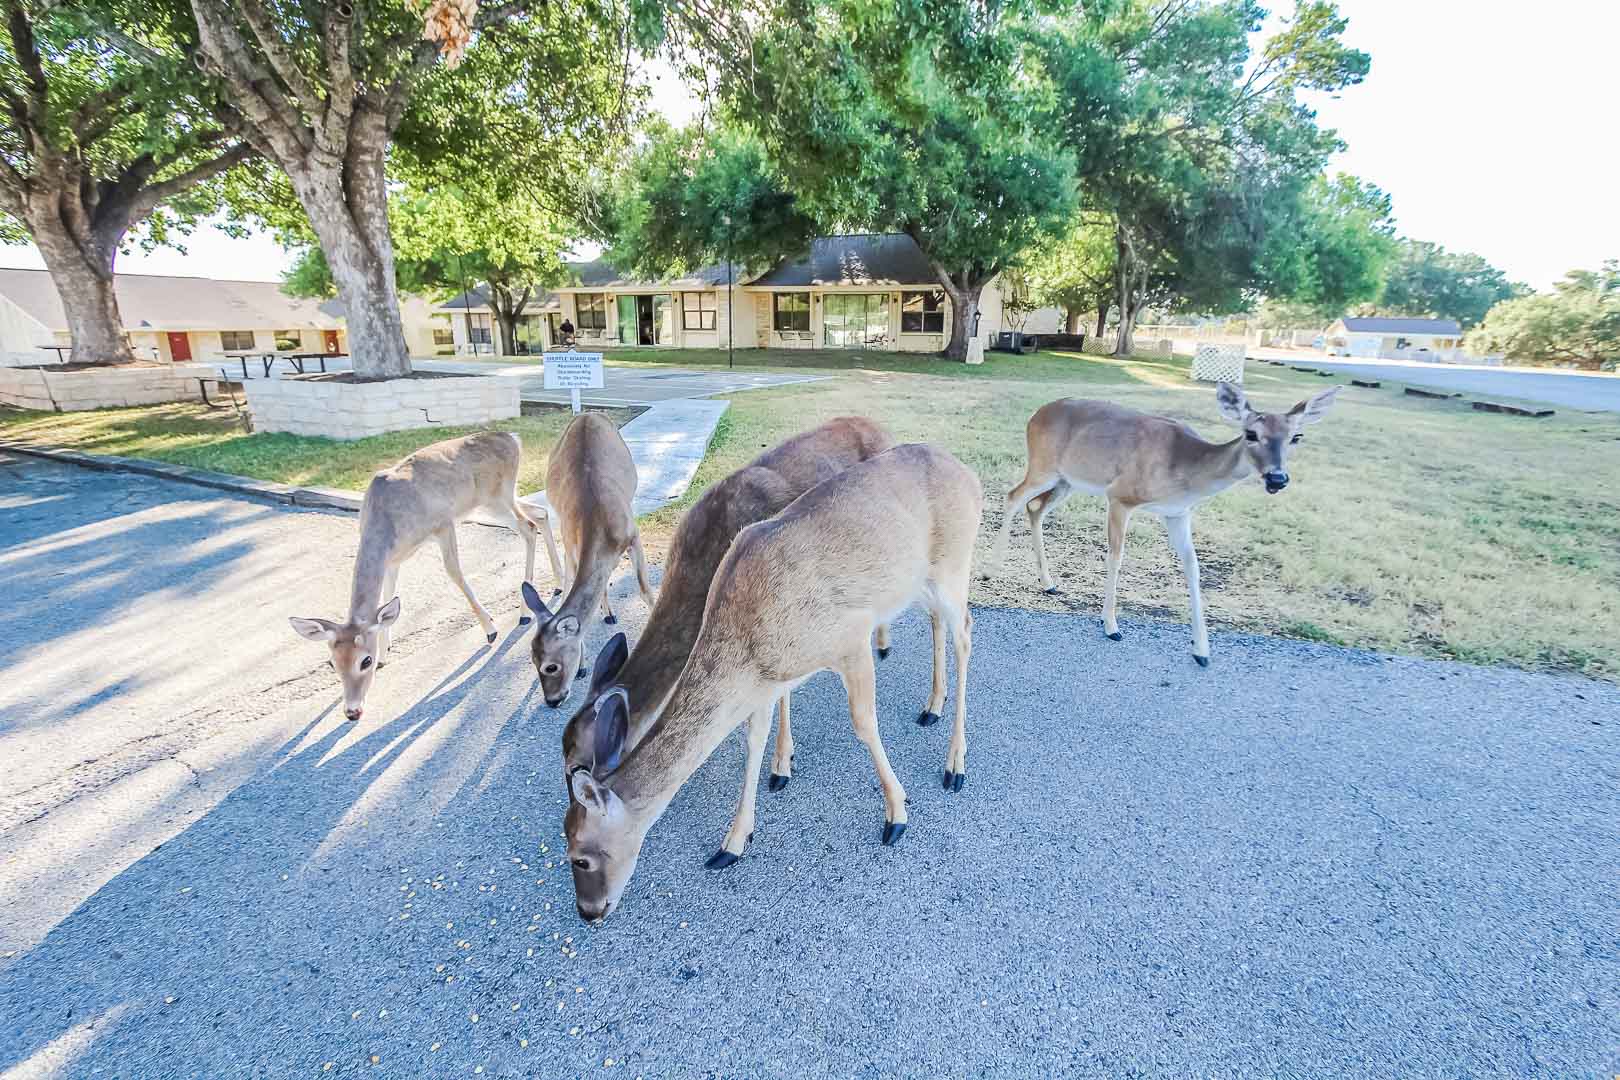 Deer located throughout the property at VRI's Vacation Village at Lake Travis in Texas.